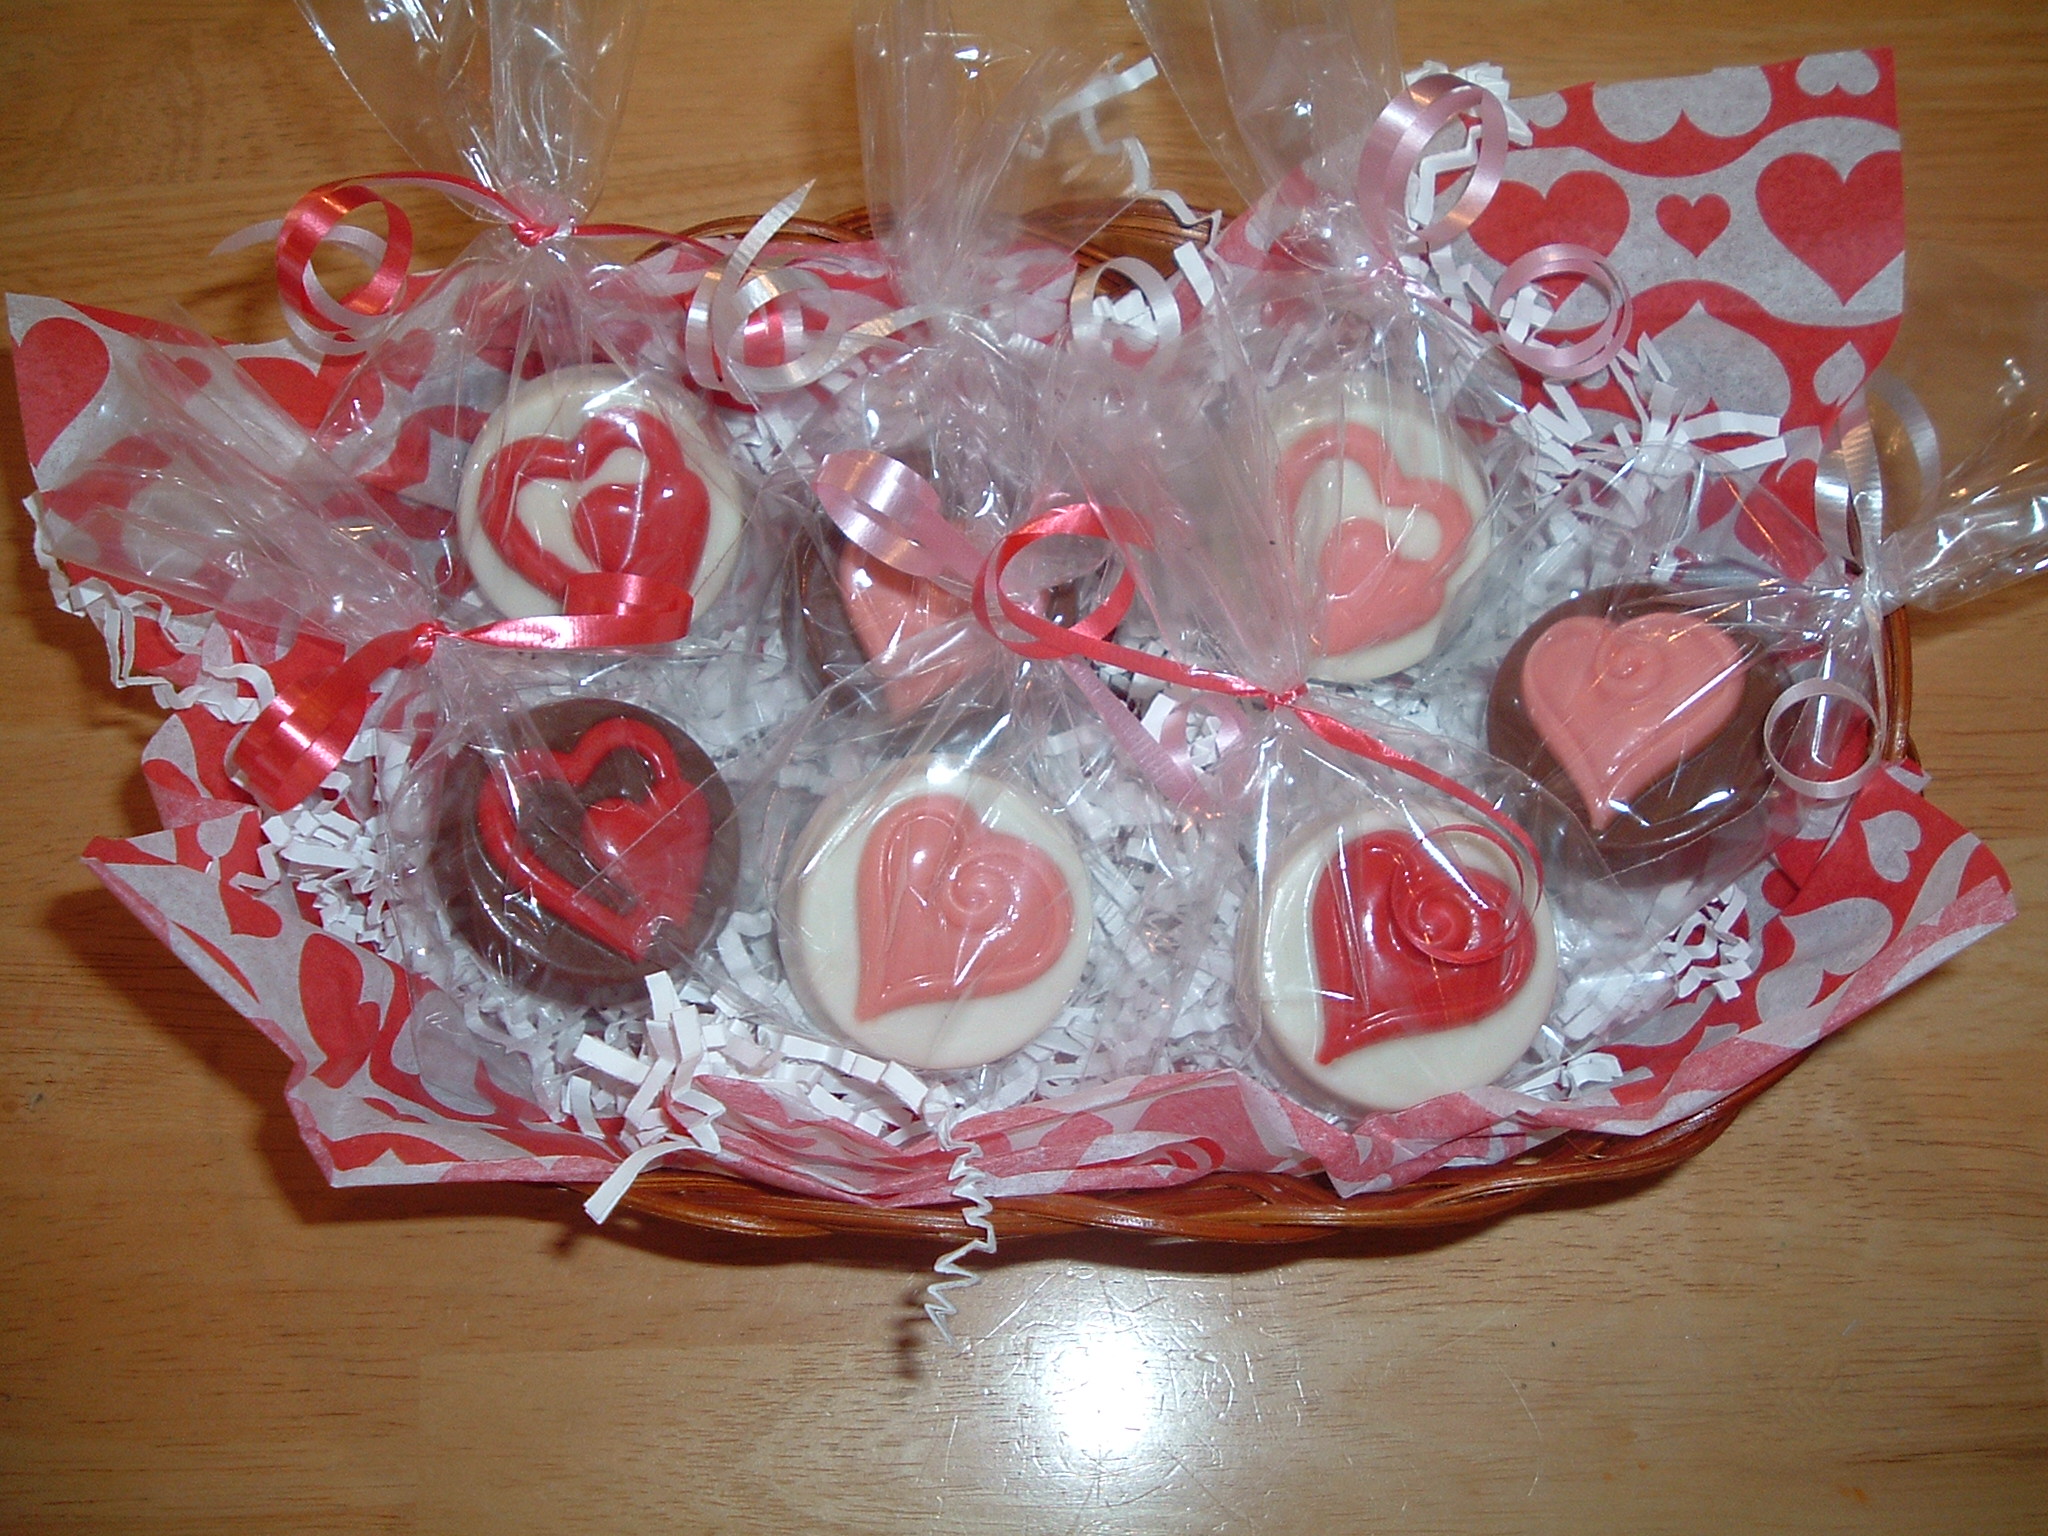 Valentines Hearts in Chocolate Oreo Cookie Basket 16